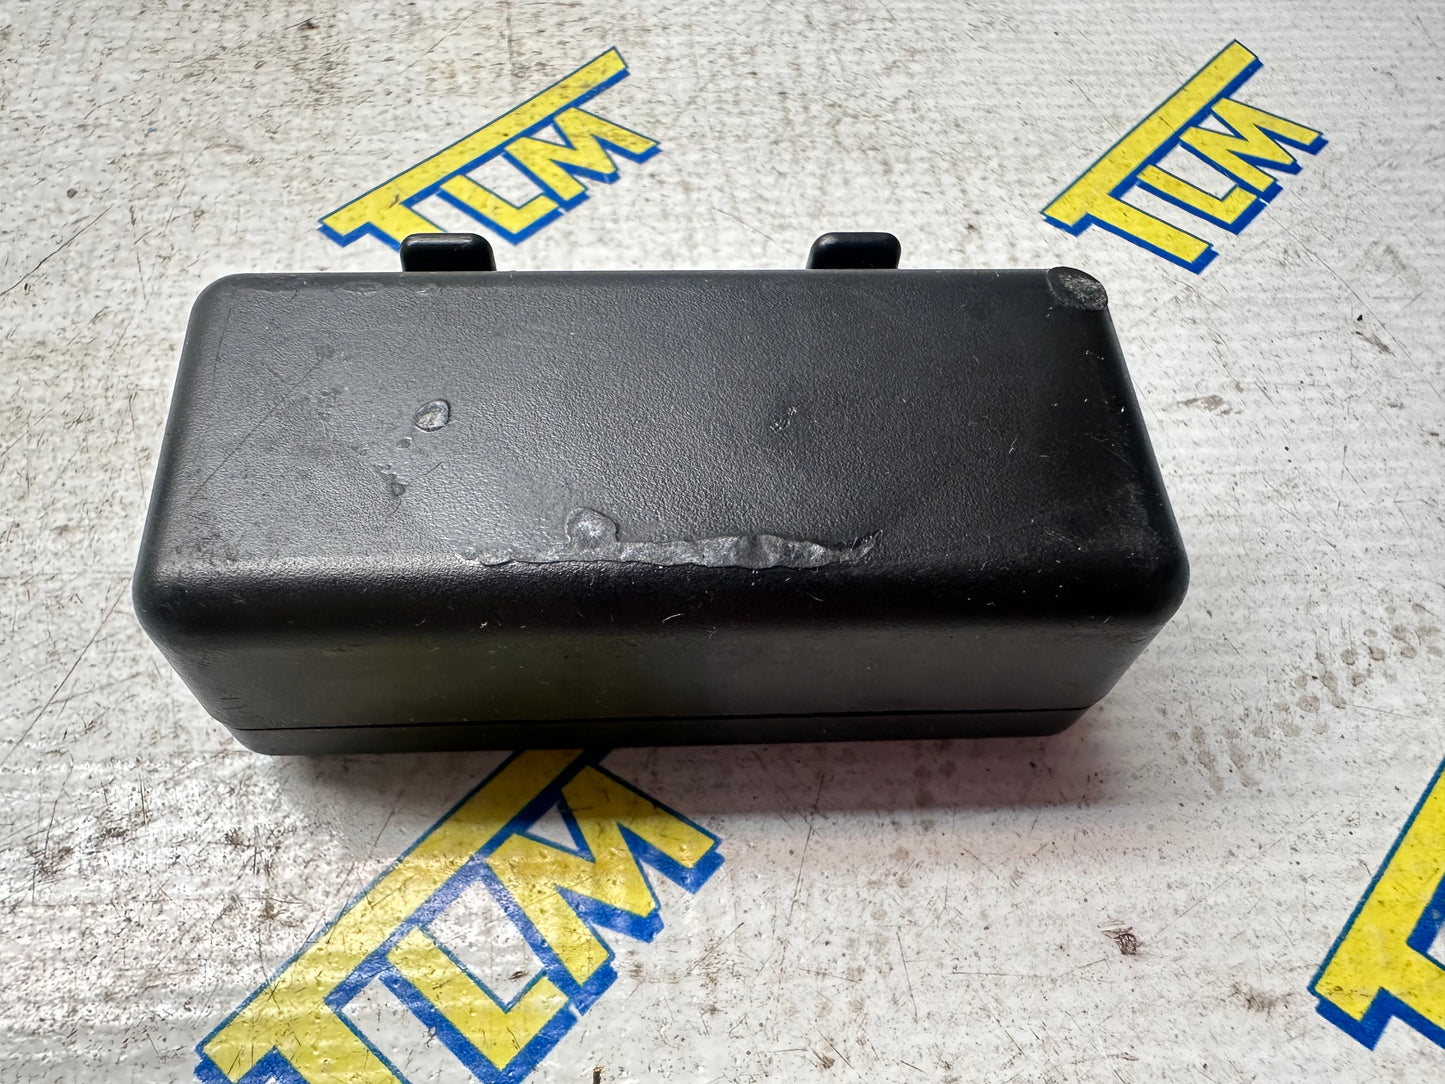 04-08 Acura TL Coin Holder Change Piggy Bank Center Console 2004 05 06 07 08 OEM